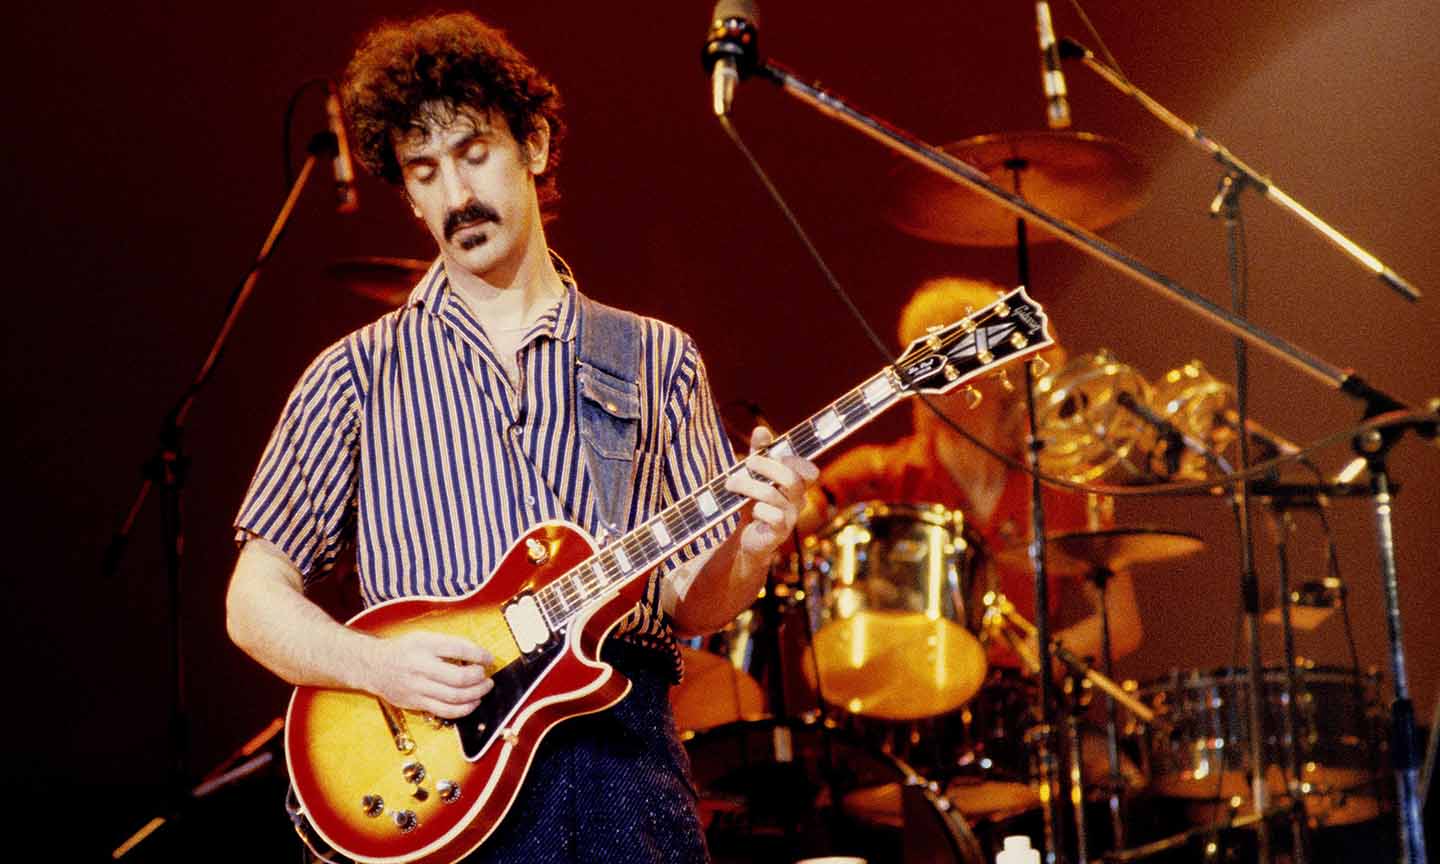 The Innovative Ways Frank Zappa Used His Live Show Recordings